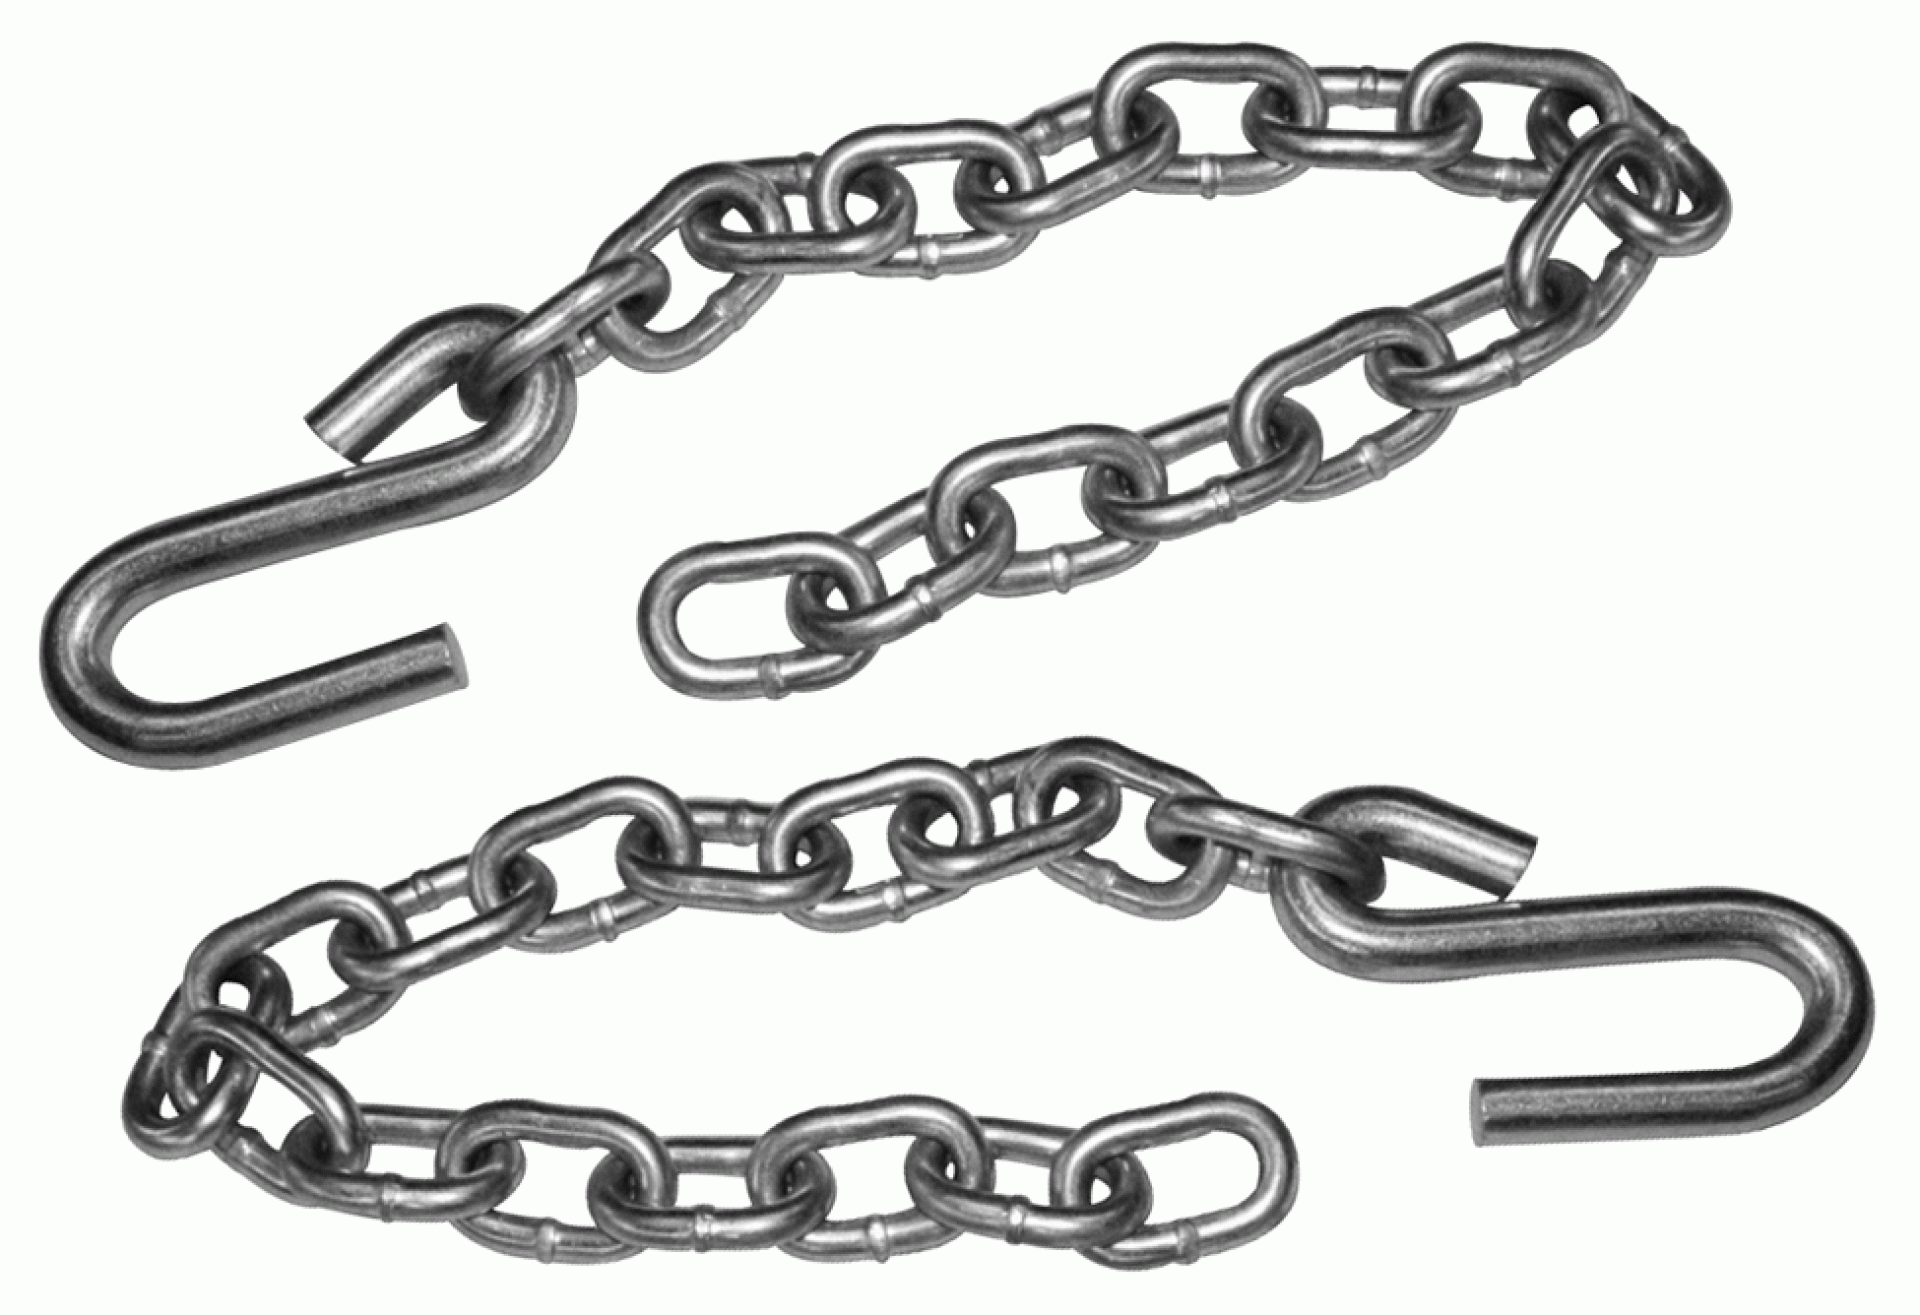 TIE DOWN ENGINEERING INC | 81203 | TRAILER SAFETY CHAINS PAIR 1/4" X 31" W/ S - HOOKS